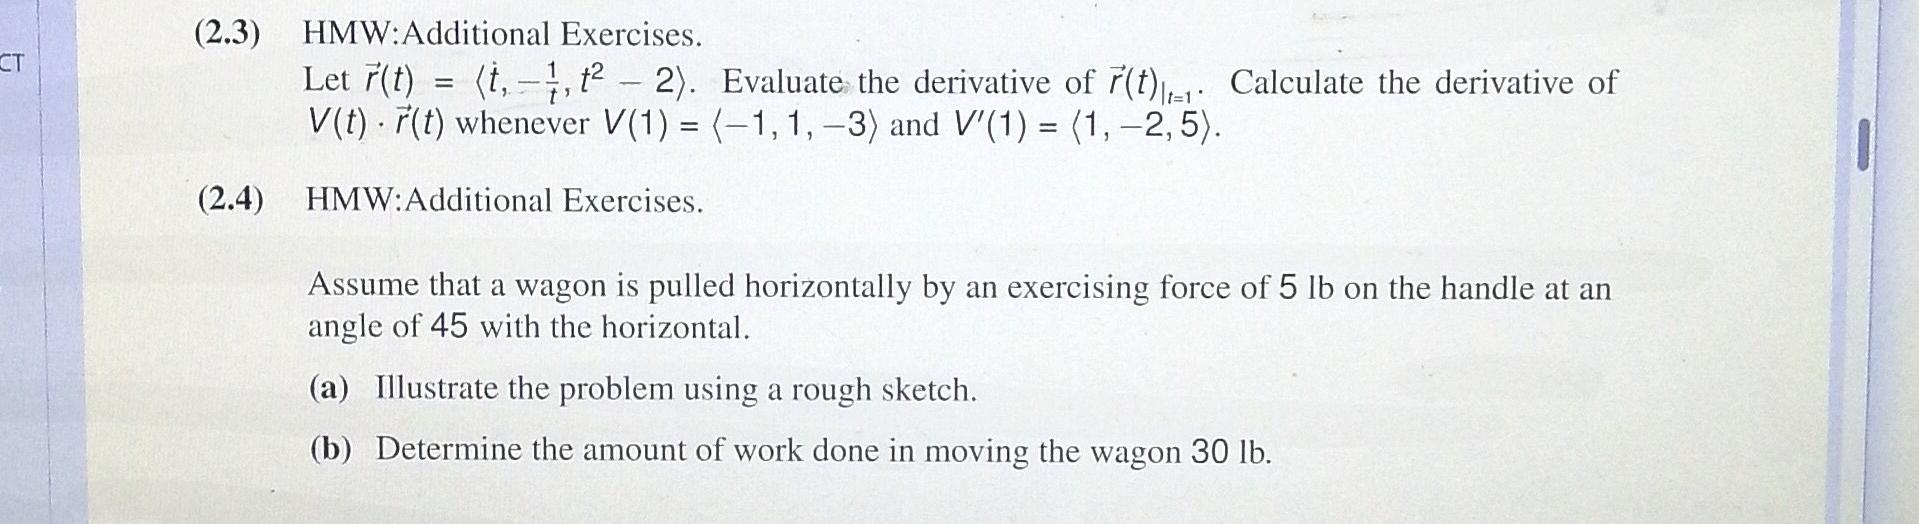 CT (2.3) HMW:Additional Exercises. Let 7(t) = (t,-1, t - 2). Evaluate the derivative of r(t) Calculate the